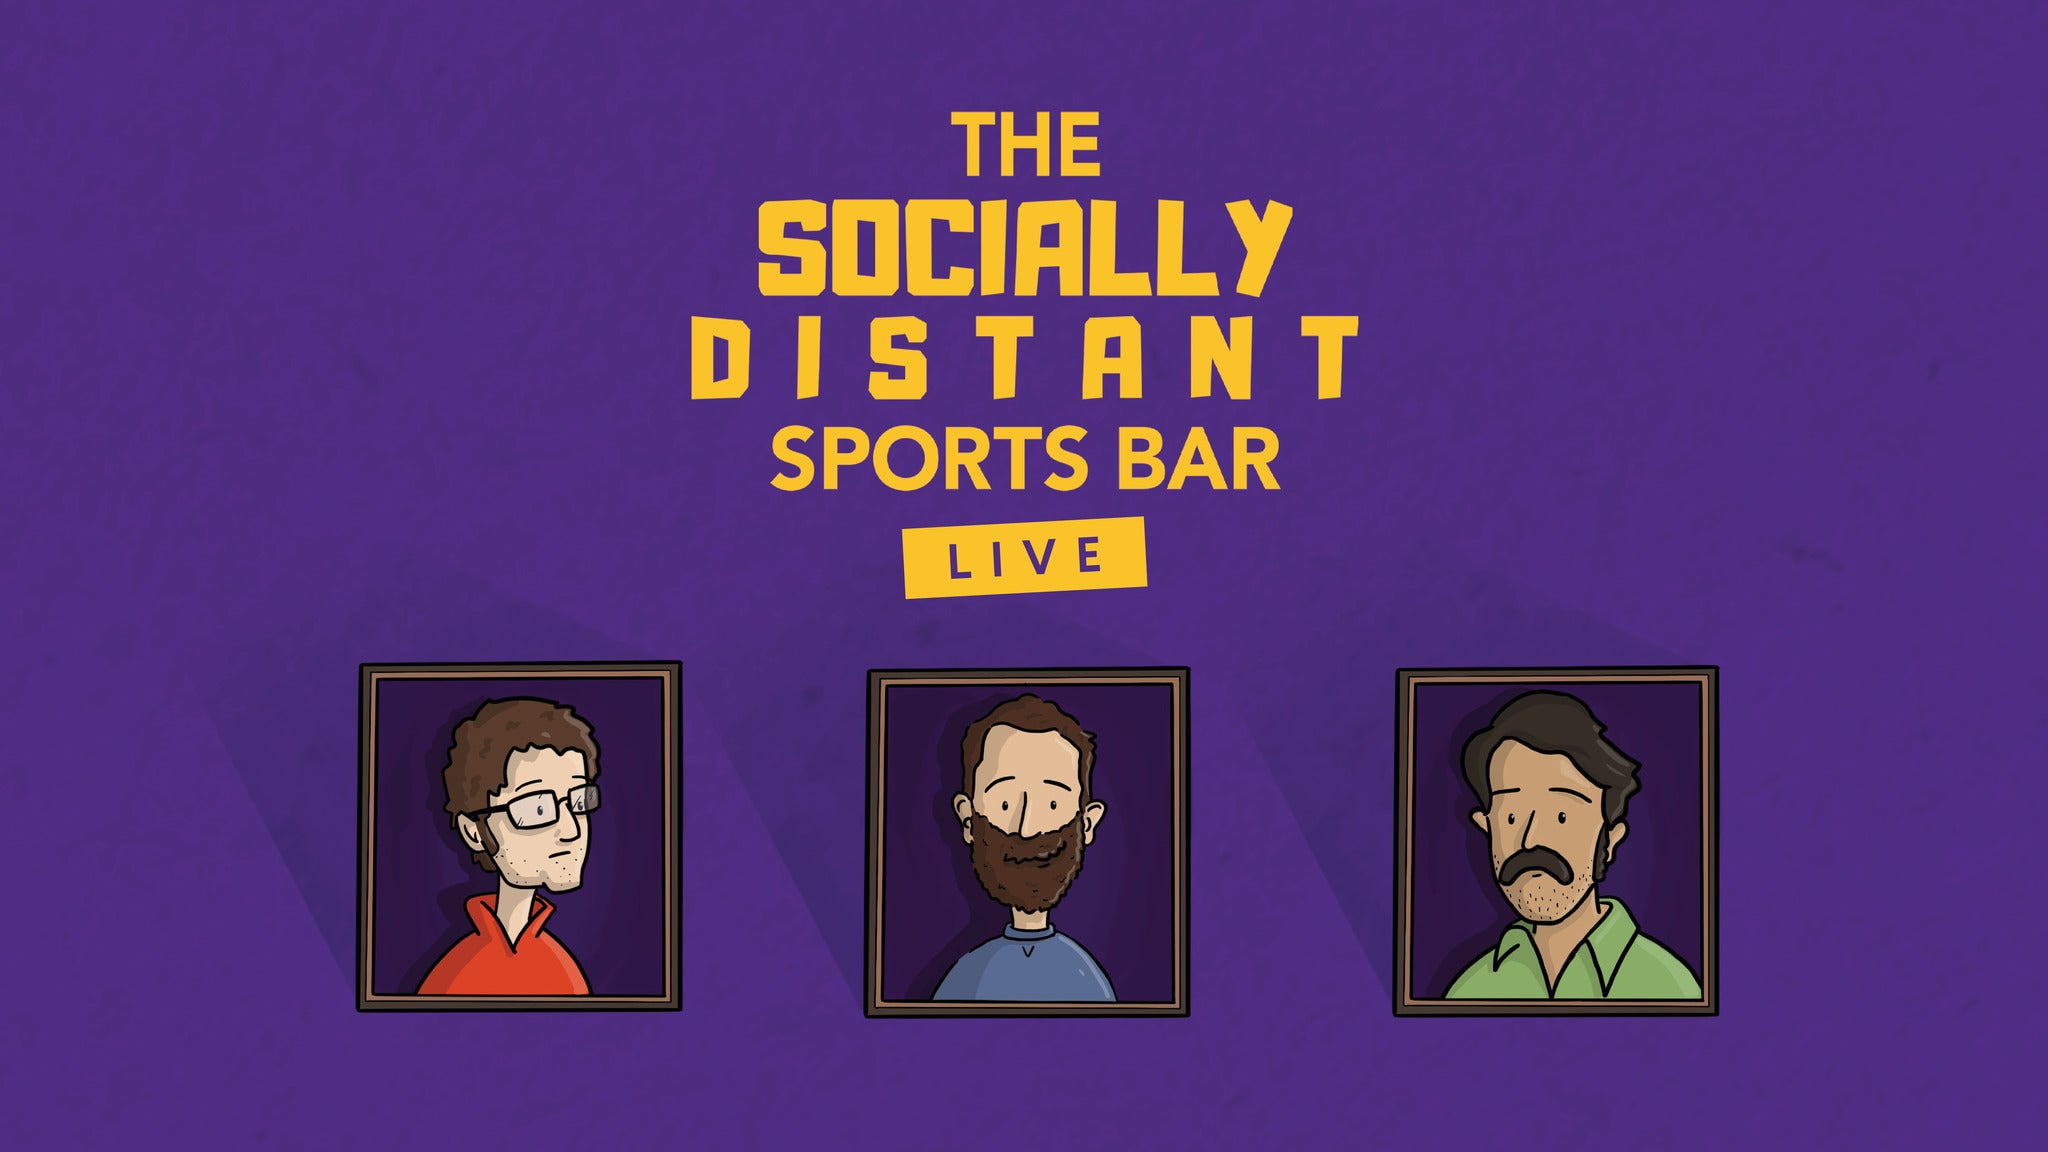 The Socially Distant Sports Bar Live